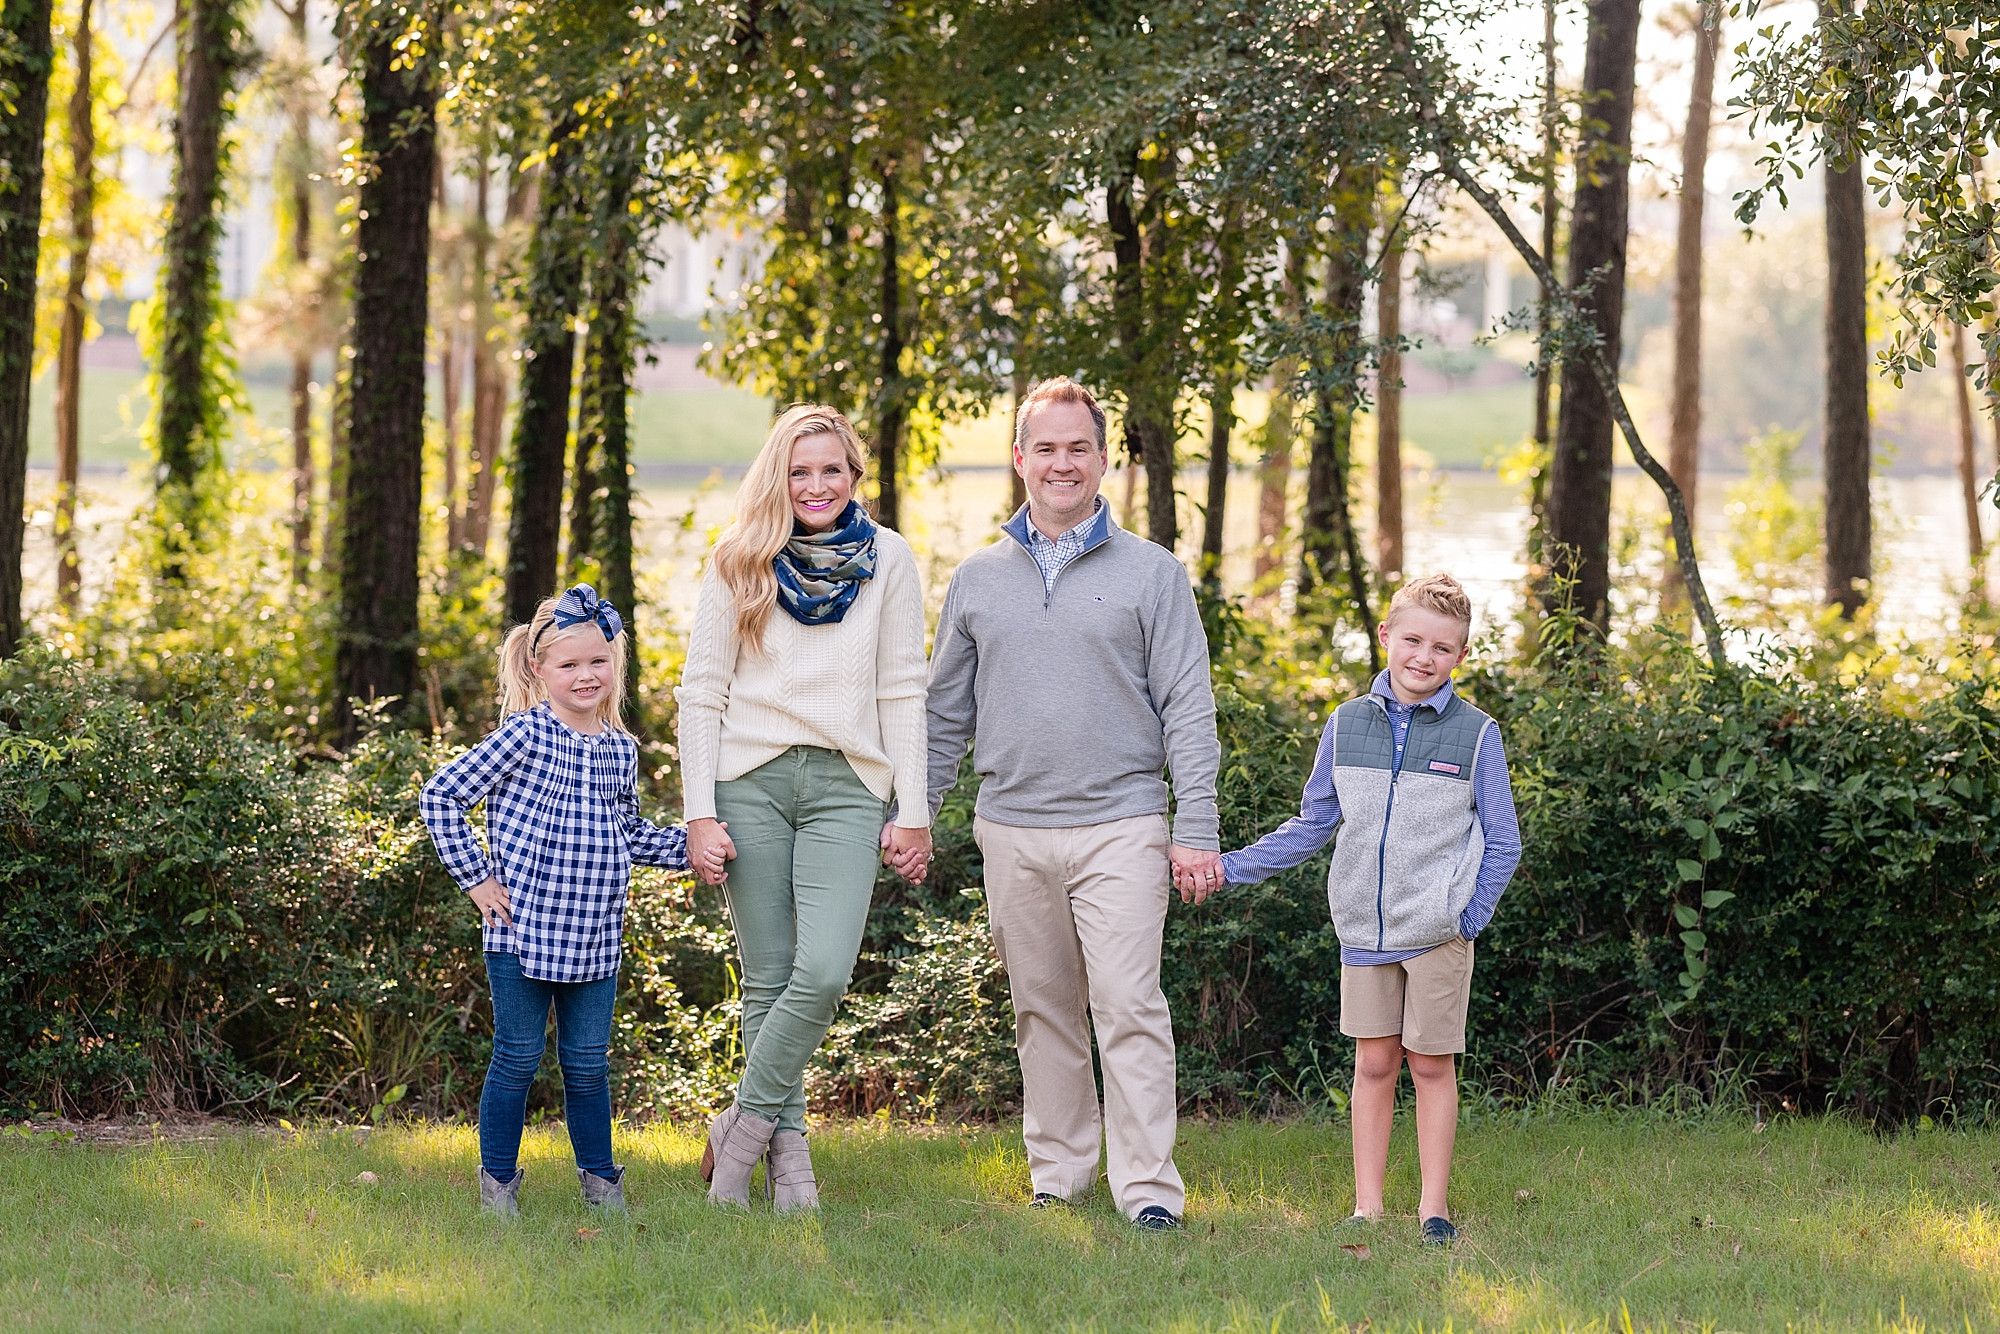 Family Fall Pictures Clothing Ideas
 Cute Fall Family Outfit Ideas Fashion